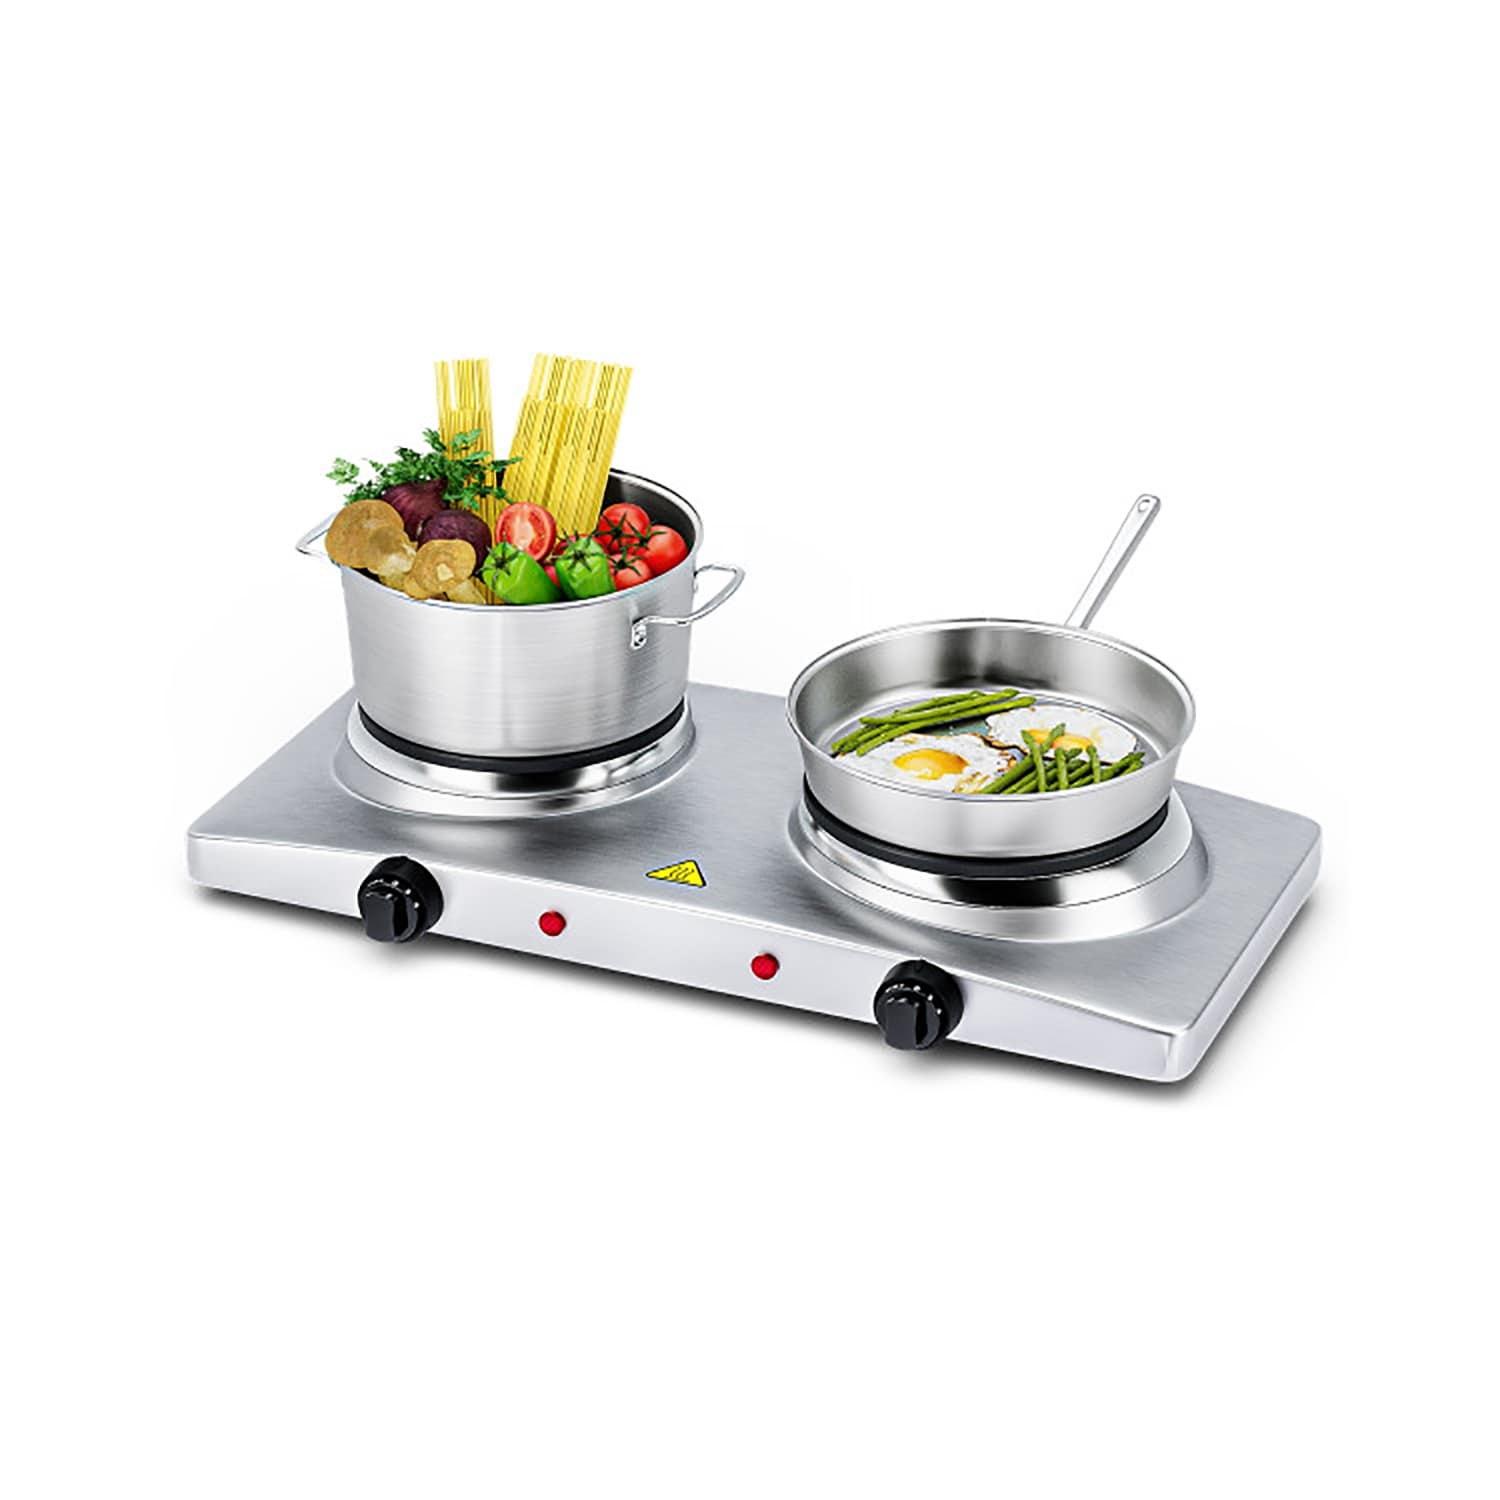 Electric Countertop Hot Plate | Model H70 | Two Large Solid Elements | Wells